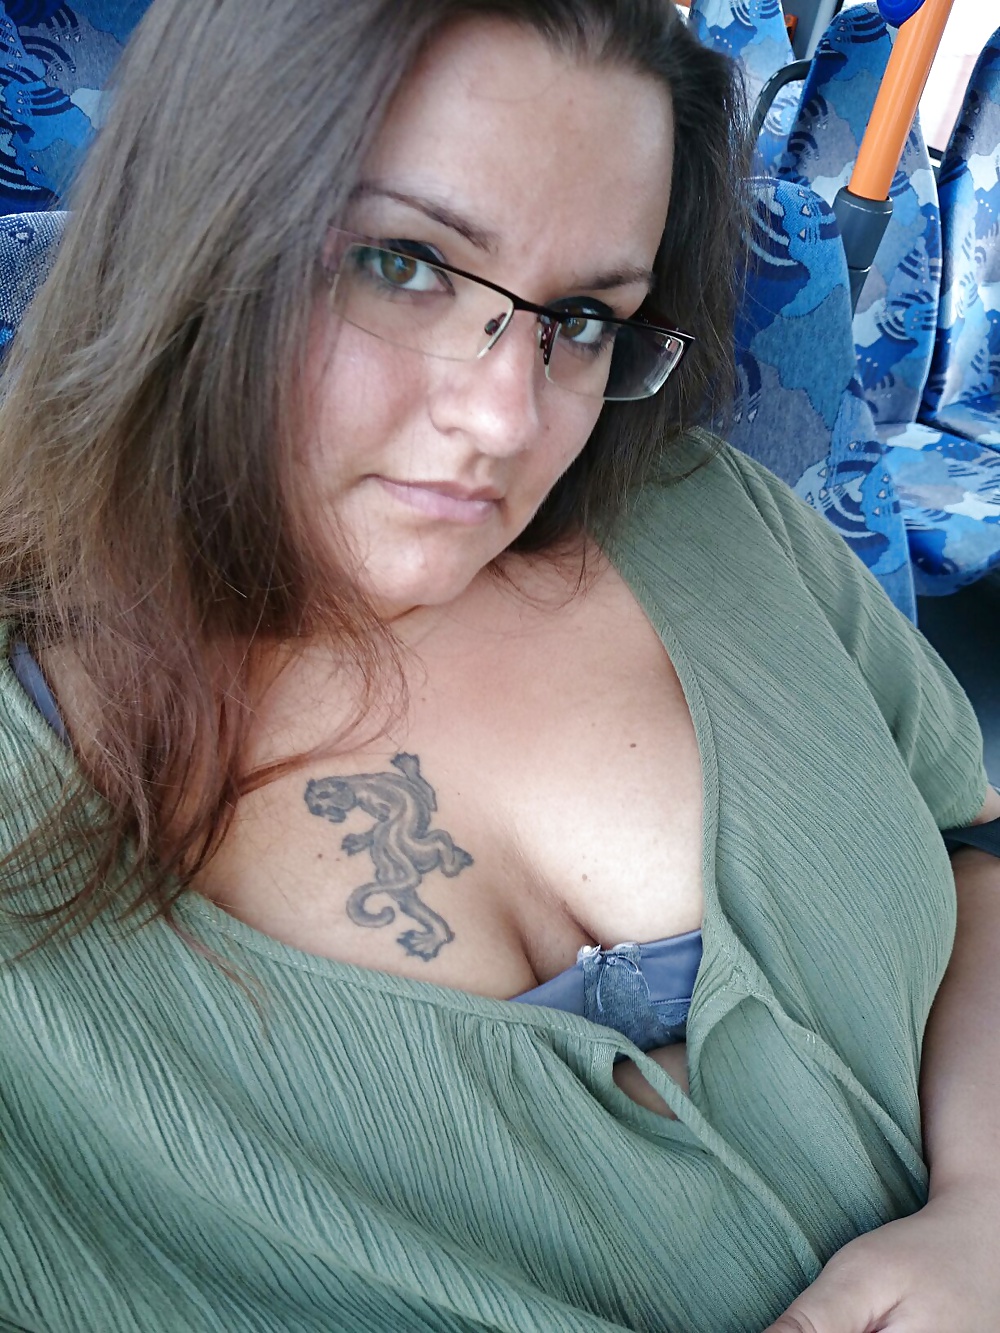 On the bus #33361846